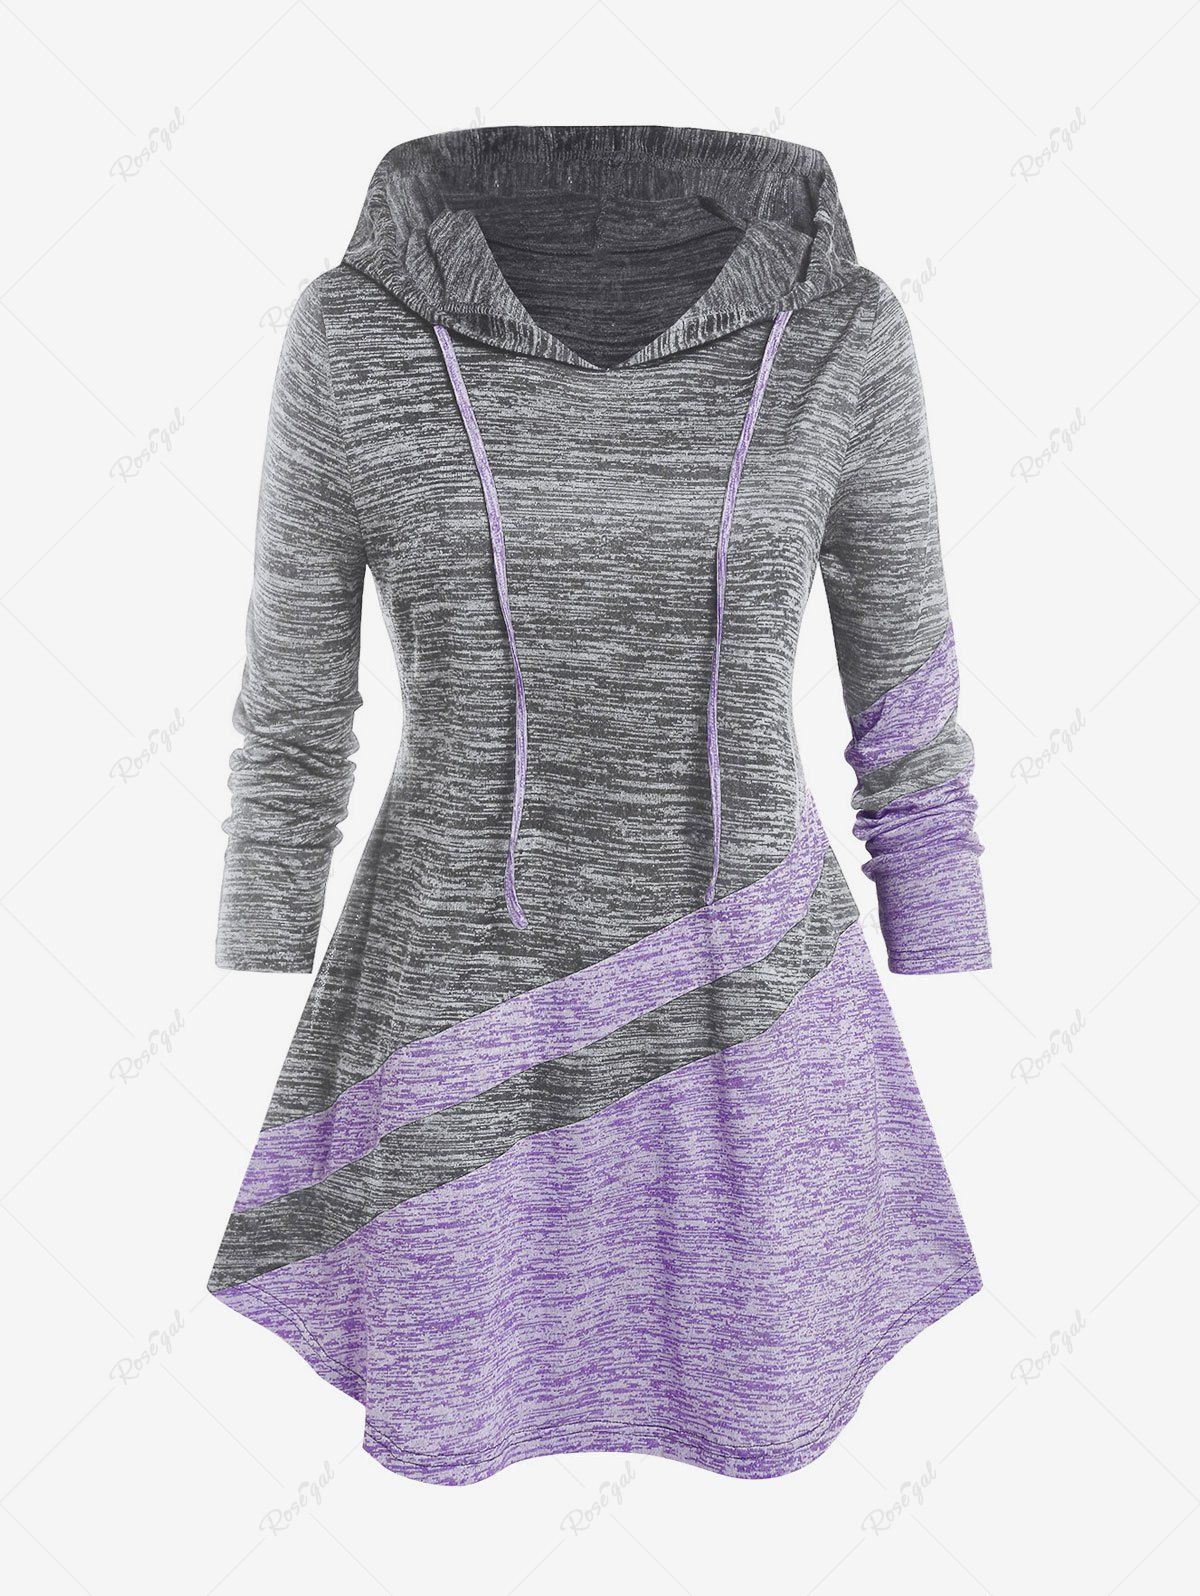 New Plus Size Hooded Space Dye Colorblock Tee  